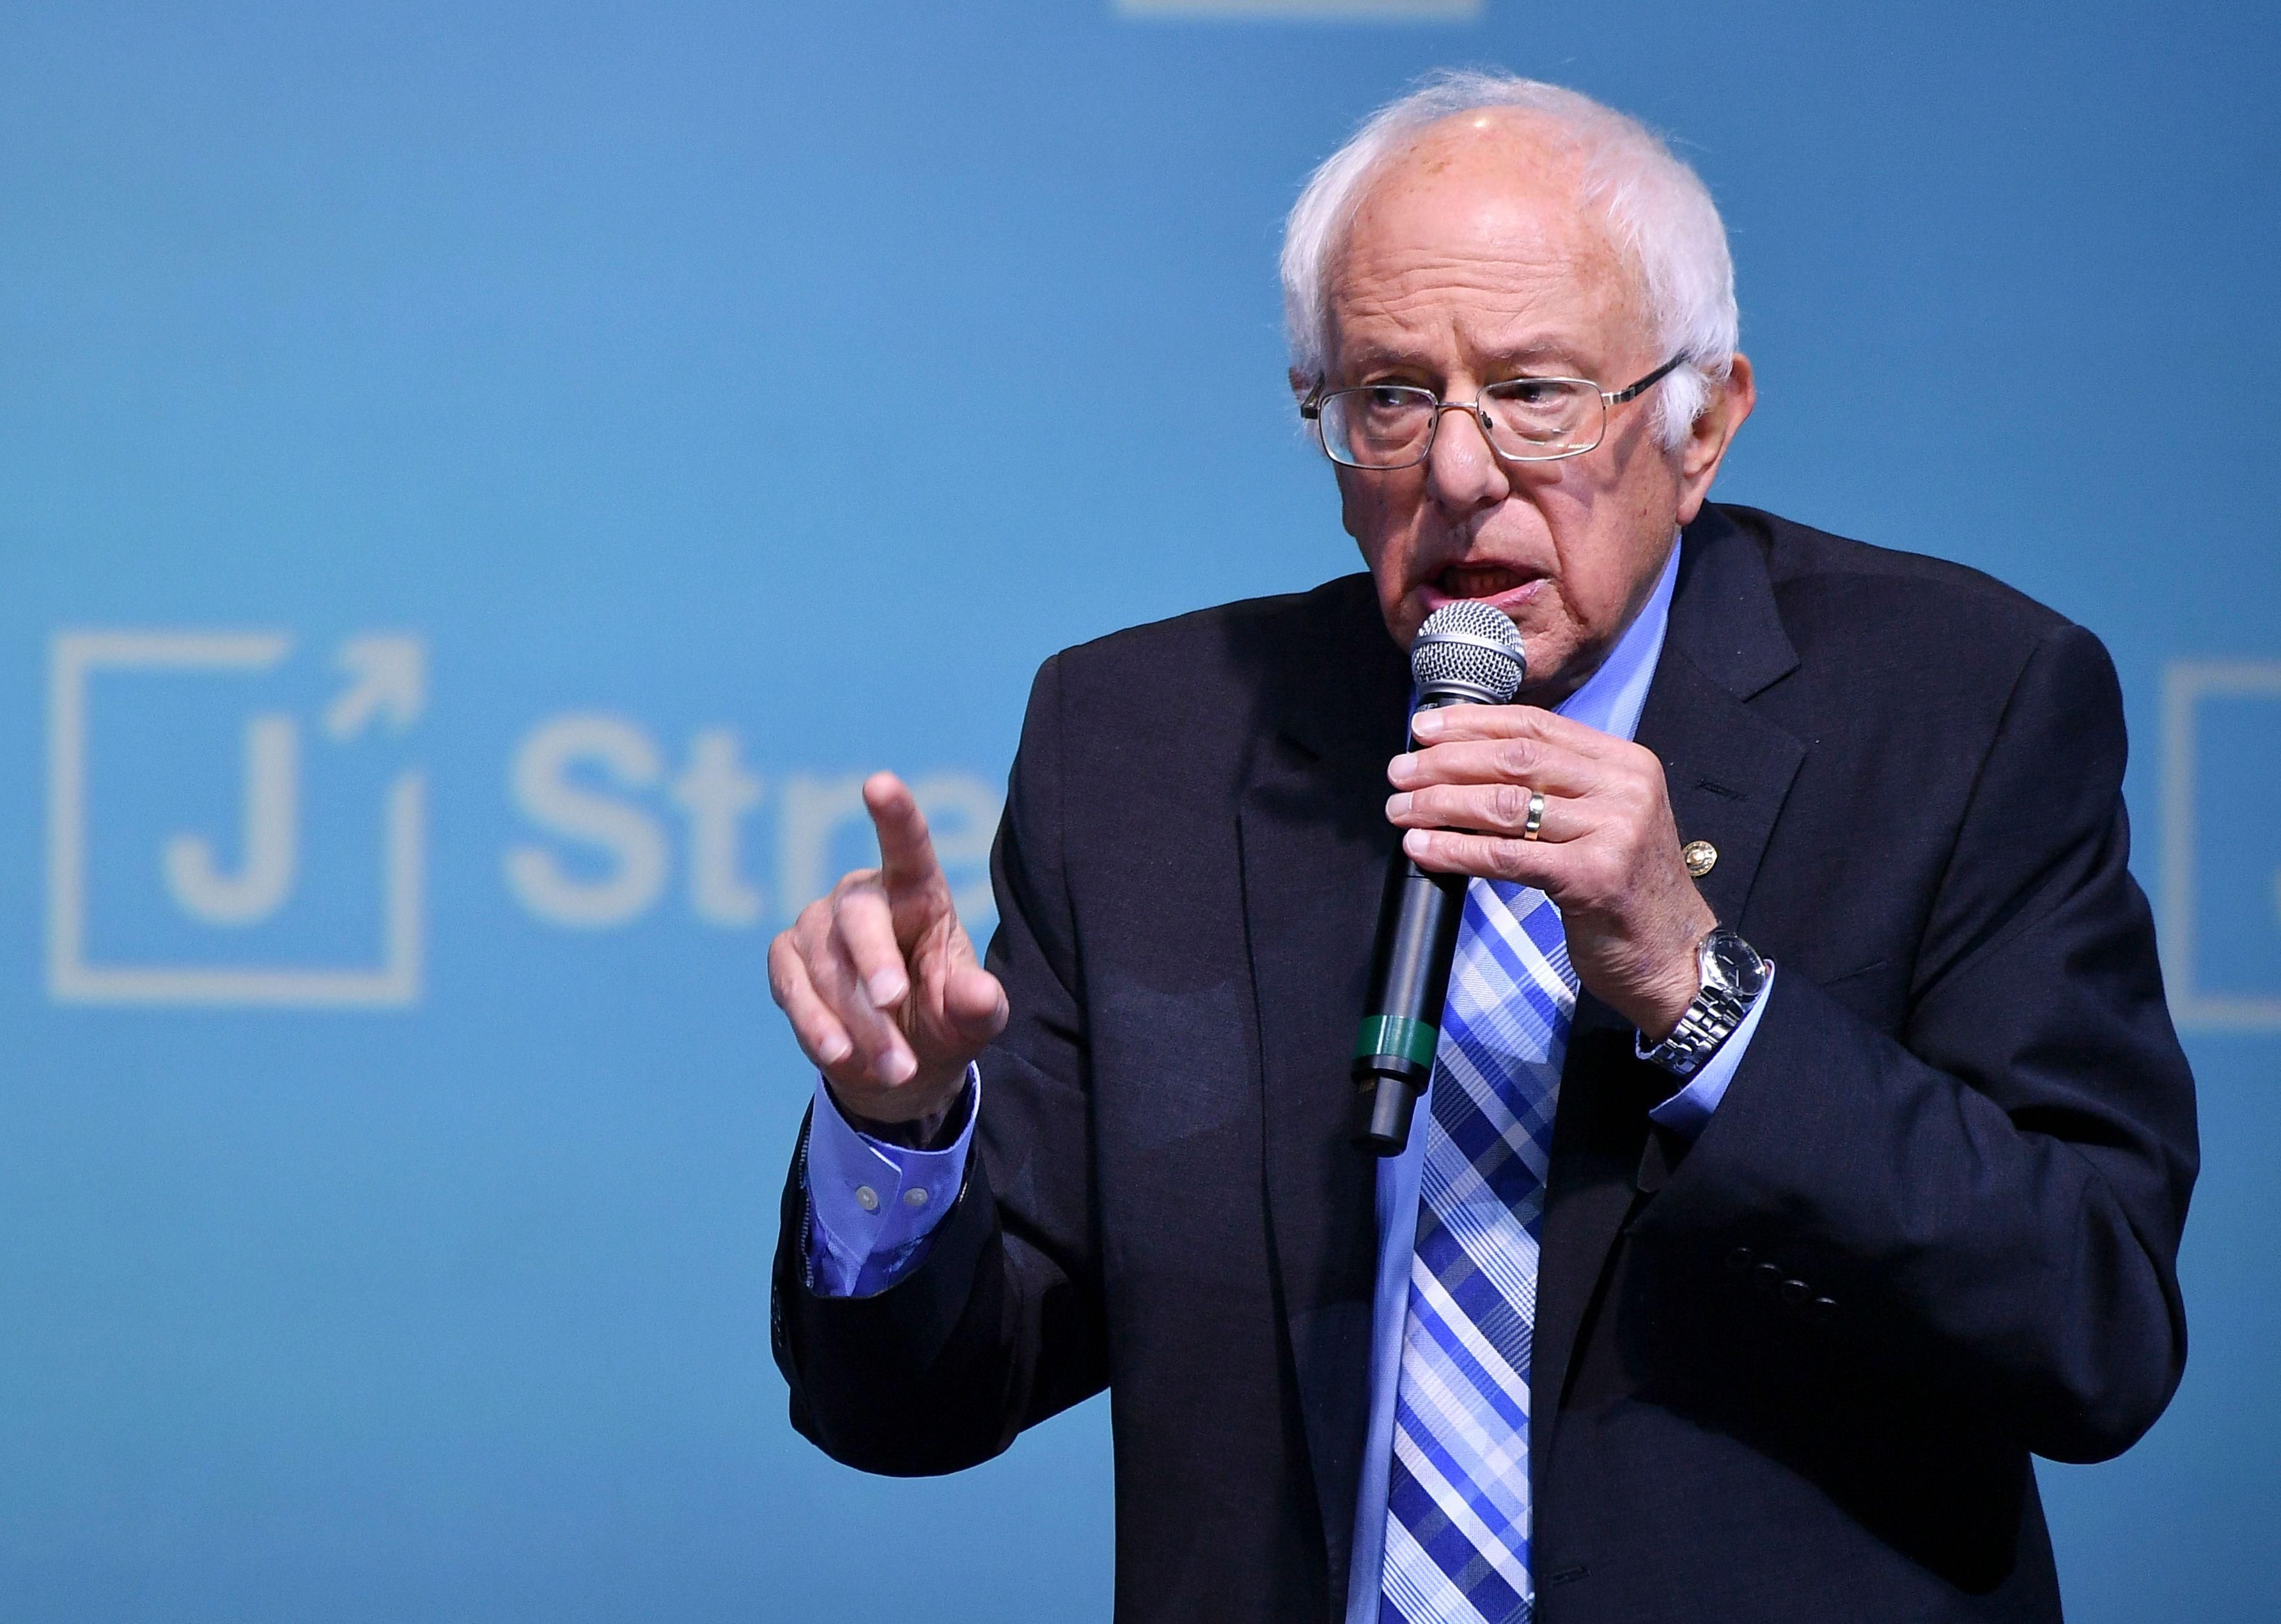 Sanders went so far as to say that some of the $3.8 billion that currently goes to Israel every year should be dedicated to humanitarian aid for Gaza. (Photo: MANDEL NGAN/AFP via Getty Images)